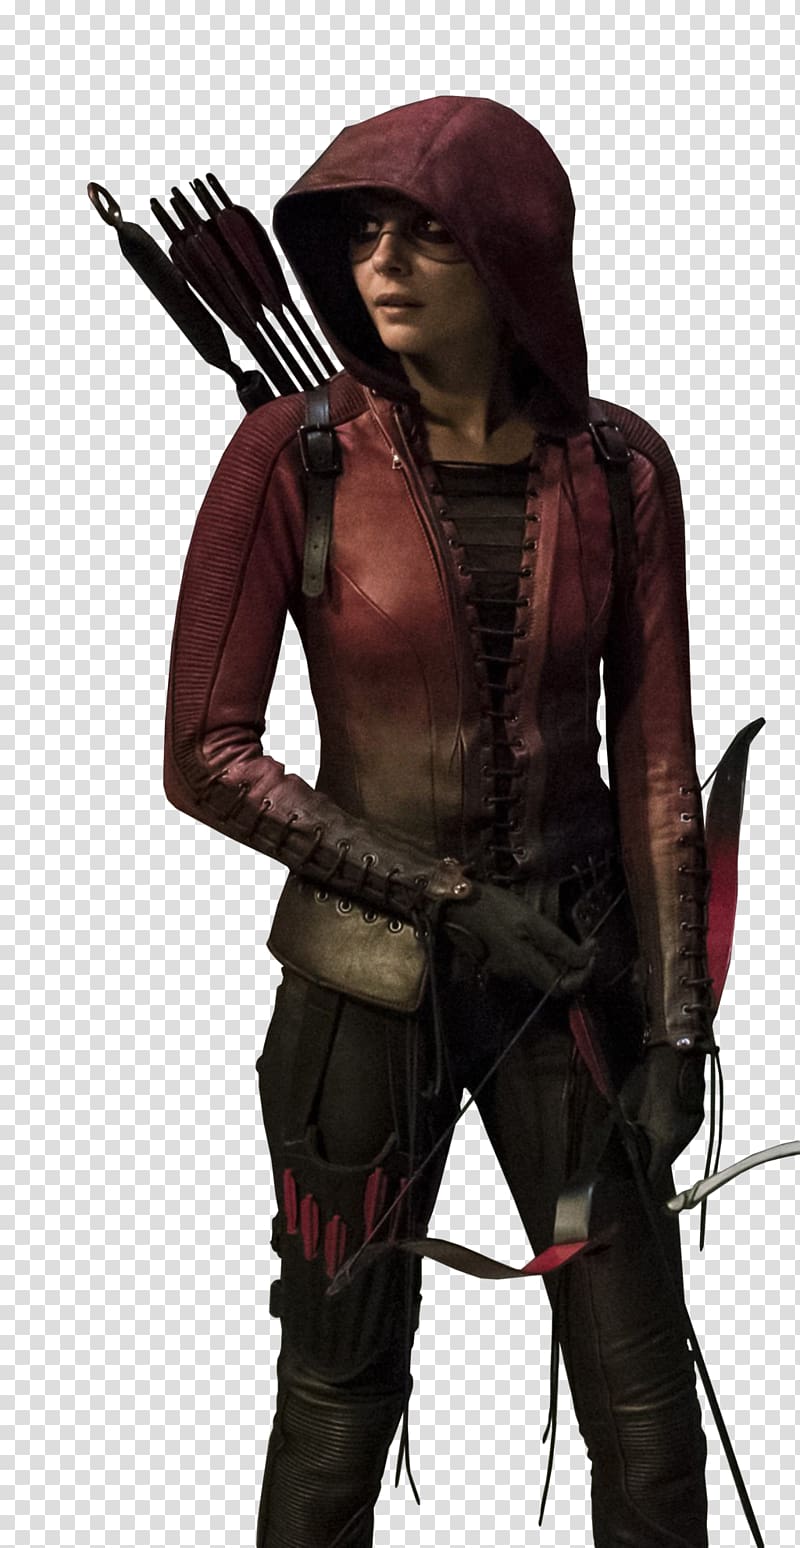 Arrow Roy Harper Speedy Thea Queen Malcolm Merlyn, left arrow transparent background PNG clipart